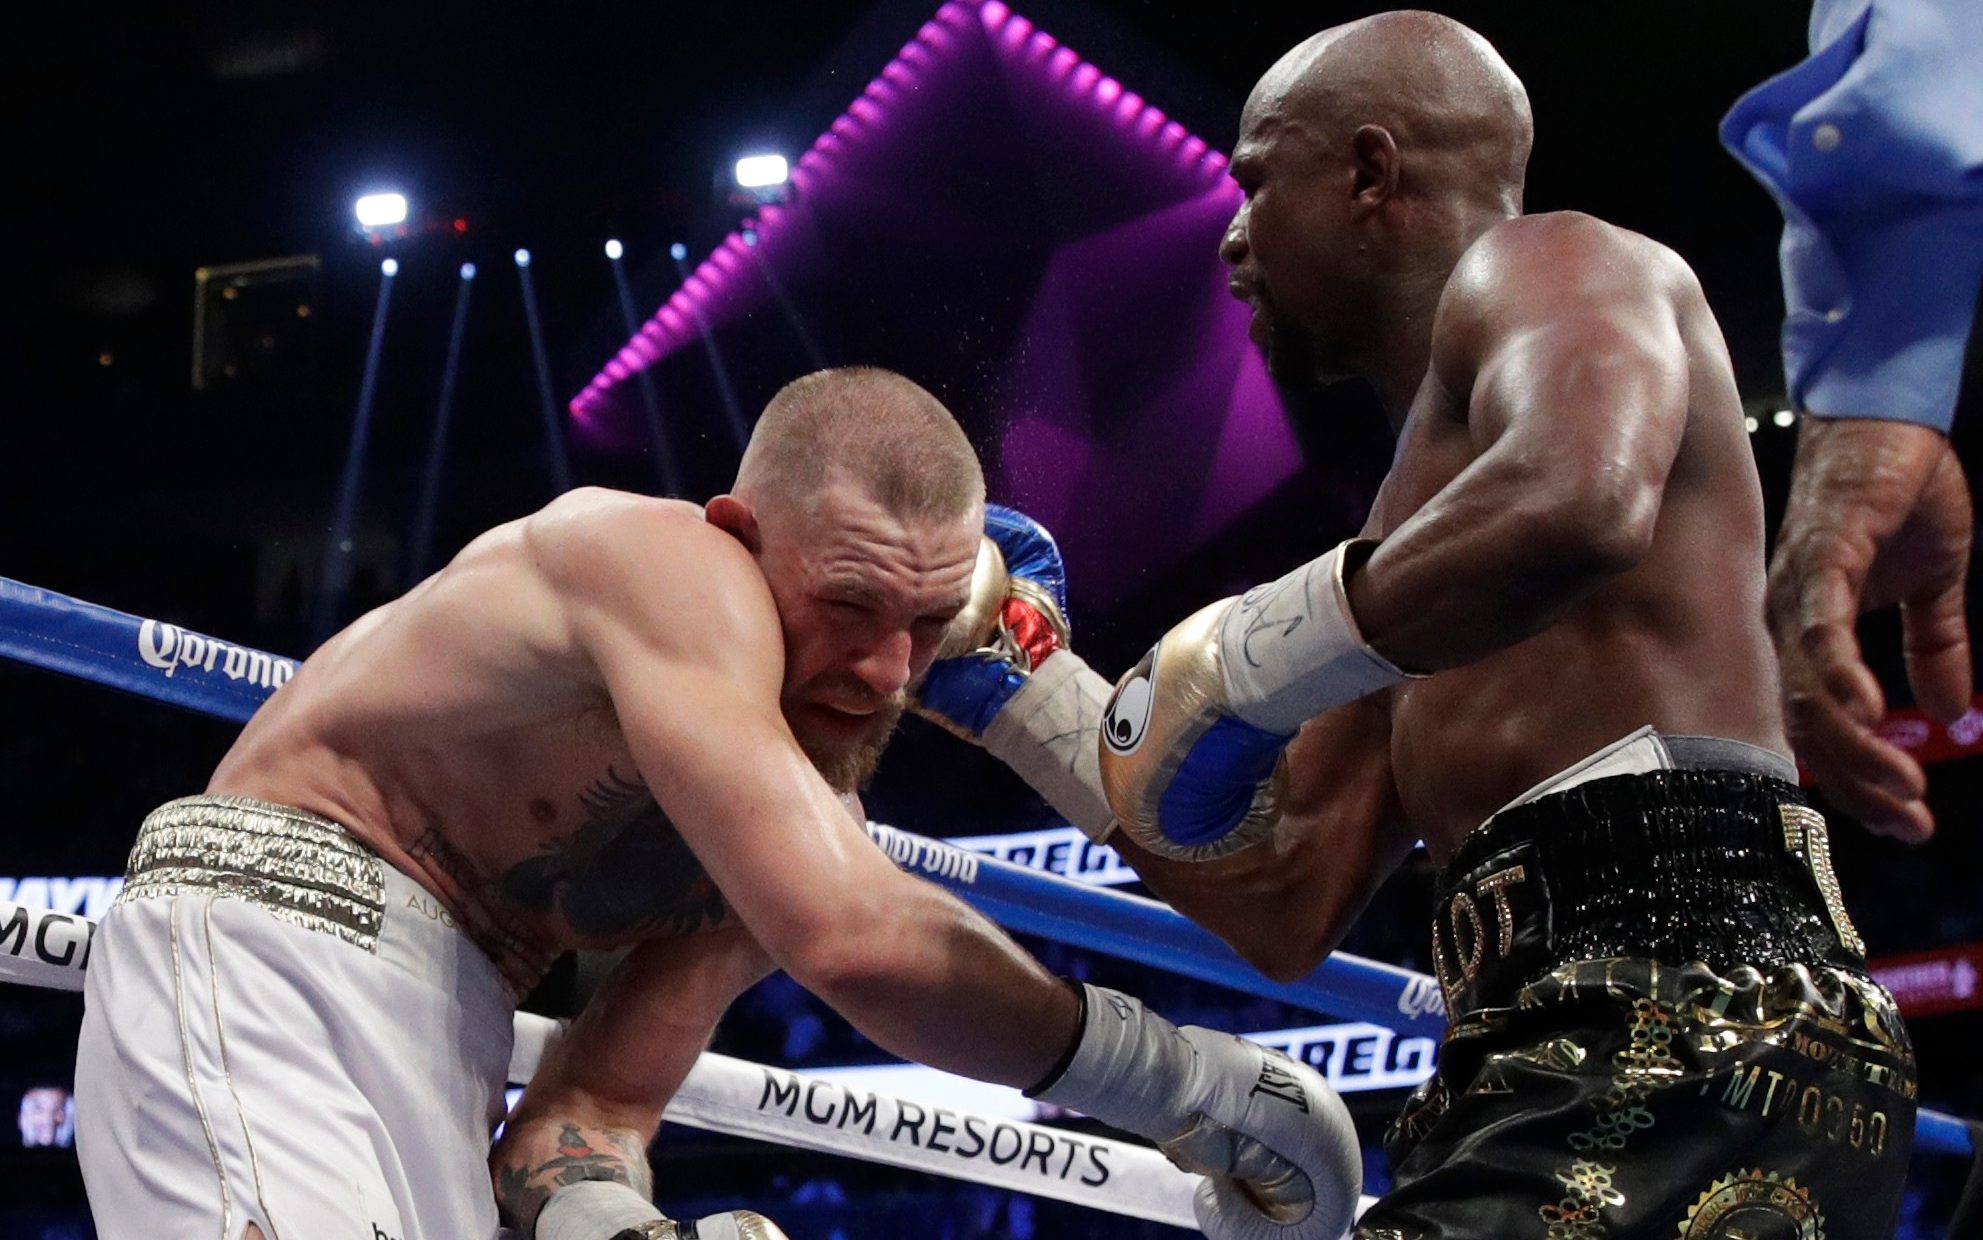 BREAKING NEWS!! Floyd Mayweather Beats Conor Mc Gregor In The Much Anticipated Boxing Fight (See How It Happened)